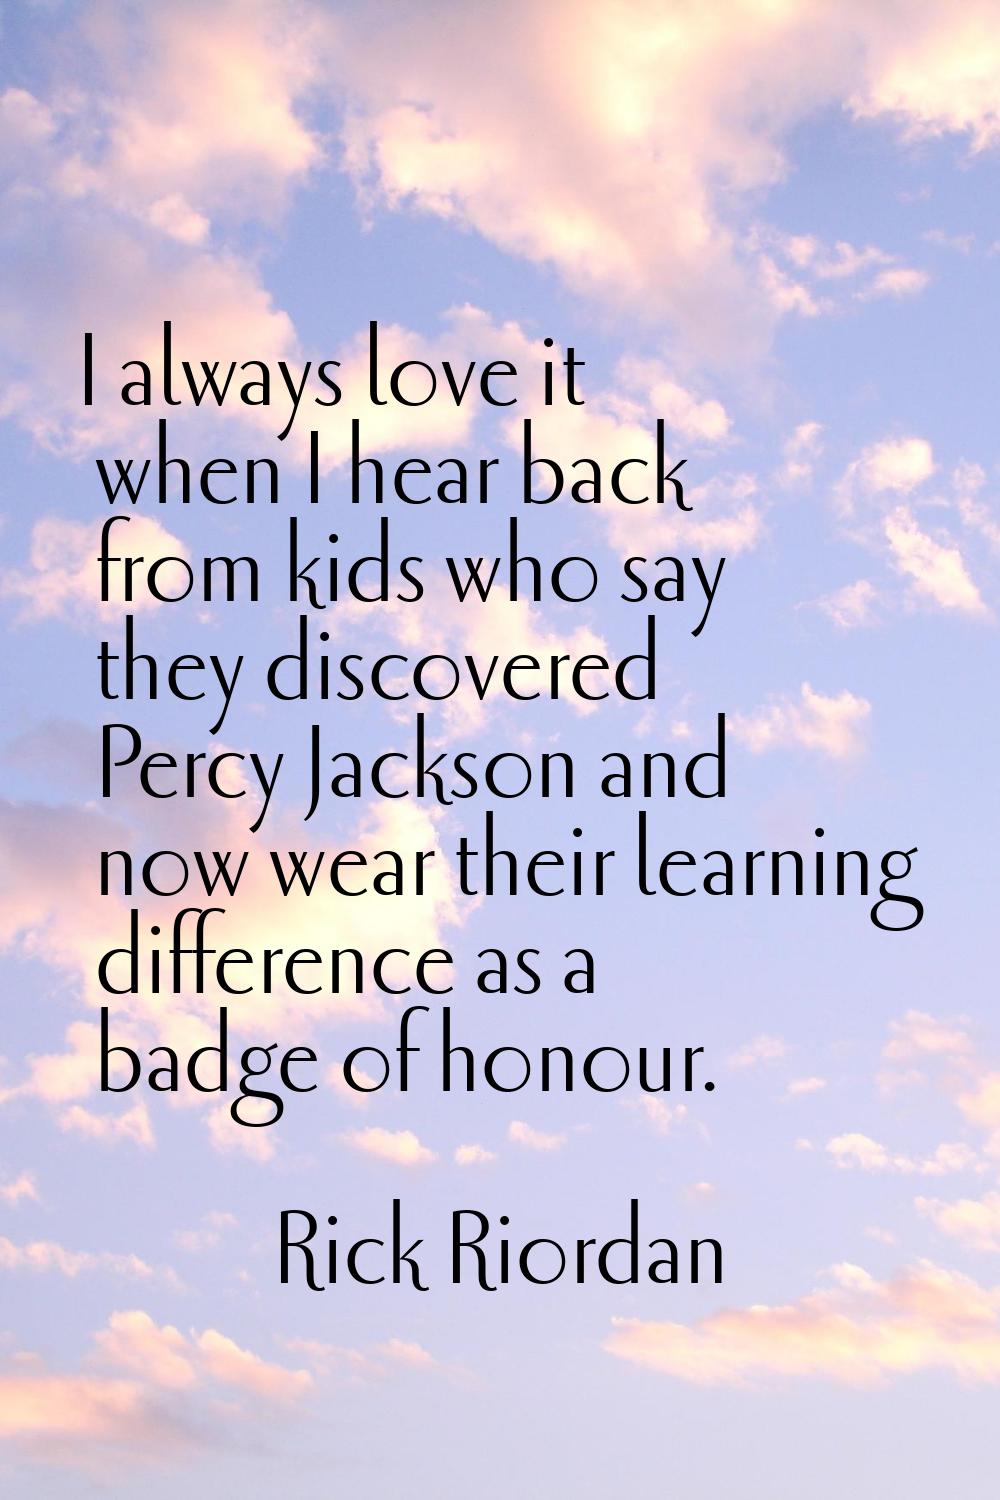 I always love it when I hear back from kids who say they discovered Percy Jackson and now wear thei